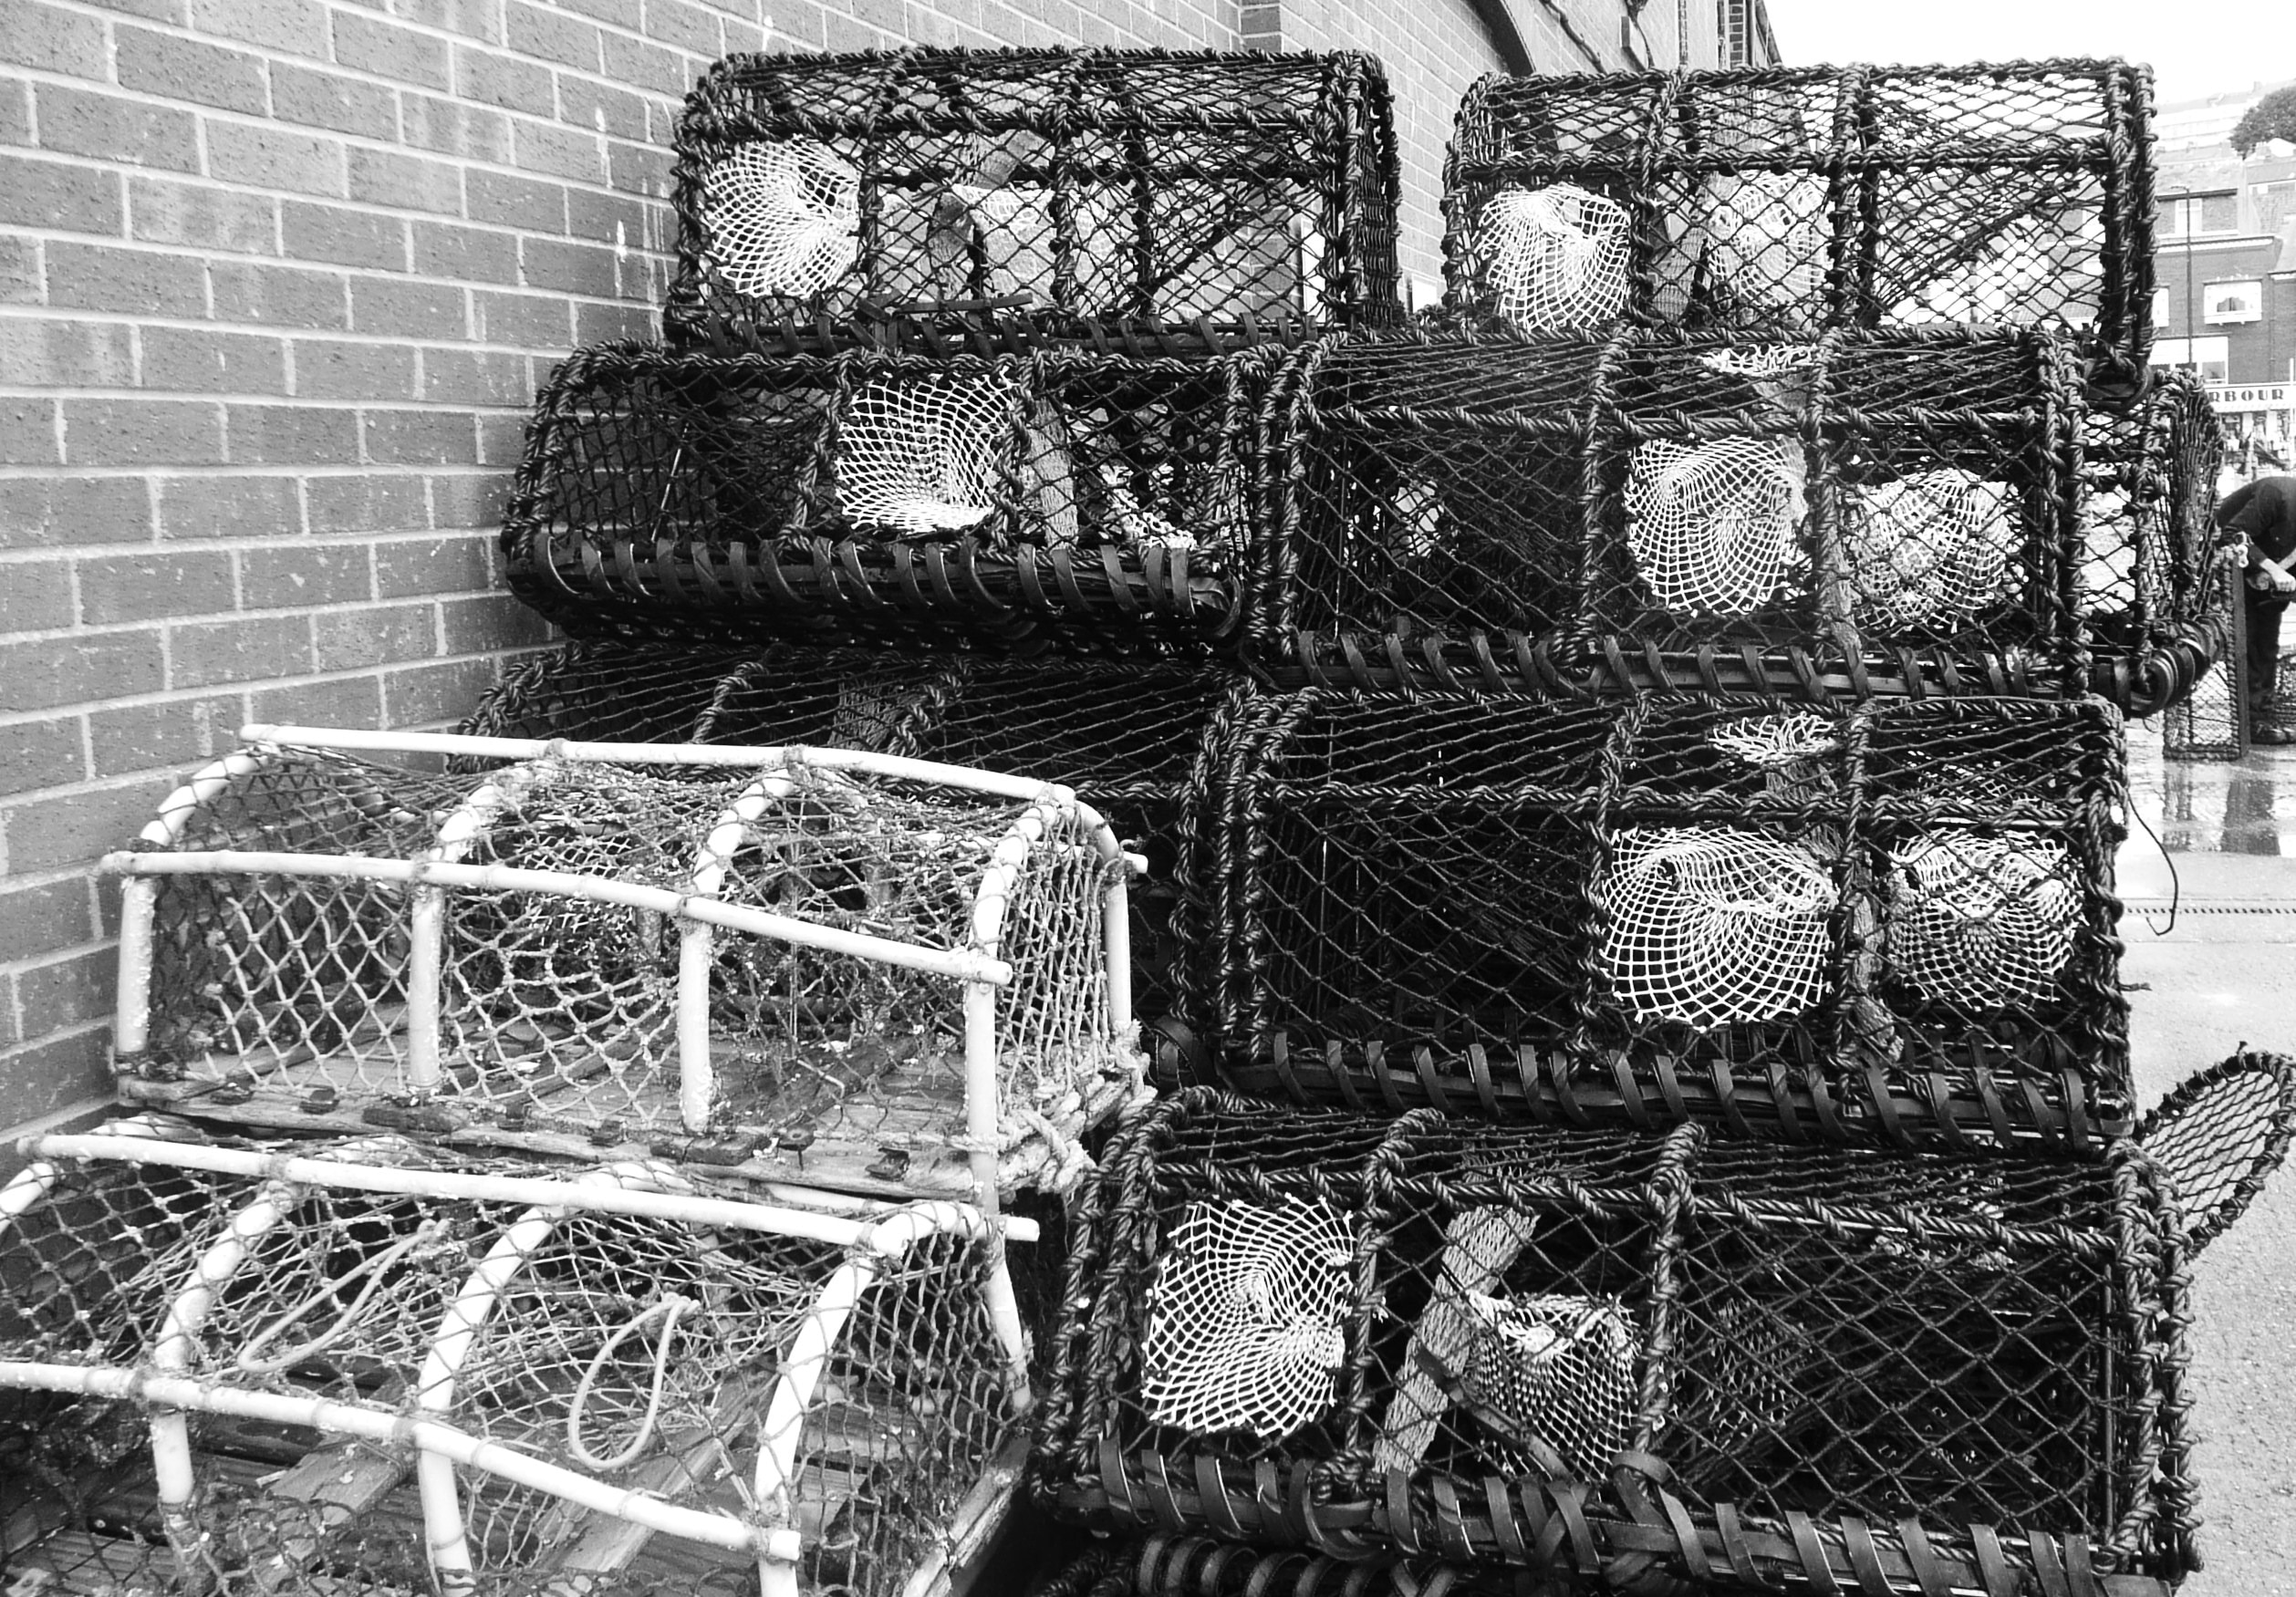 greyscale photo of cages